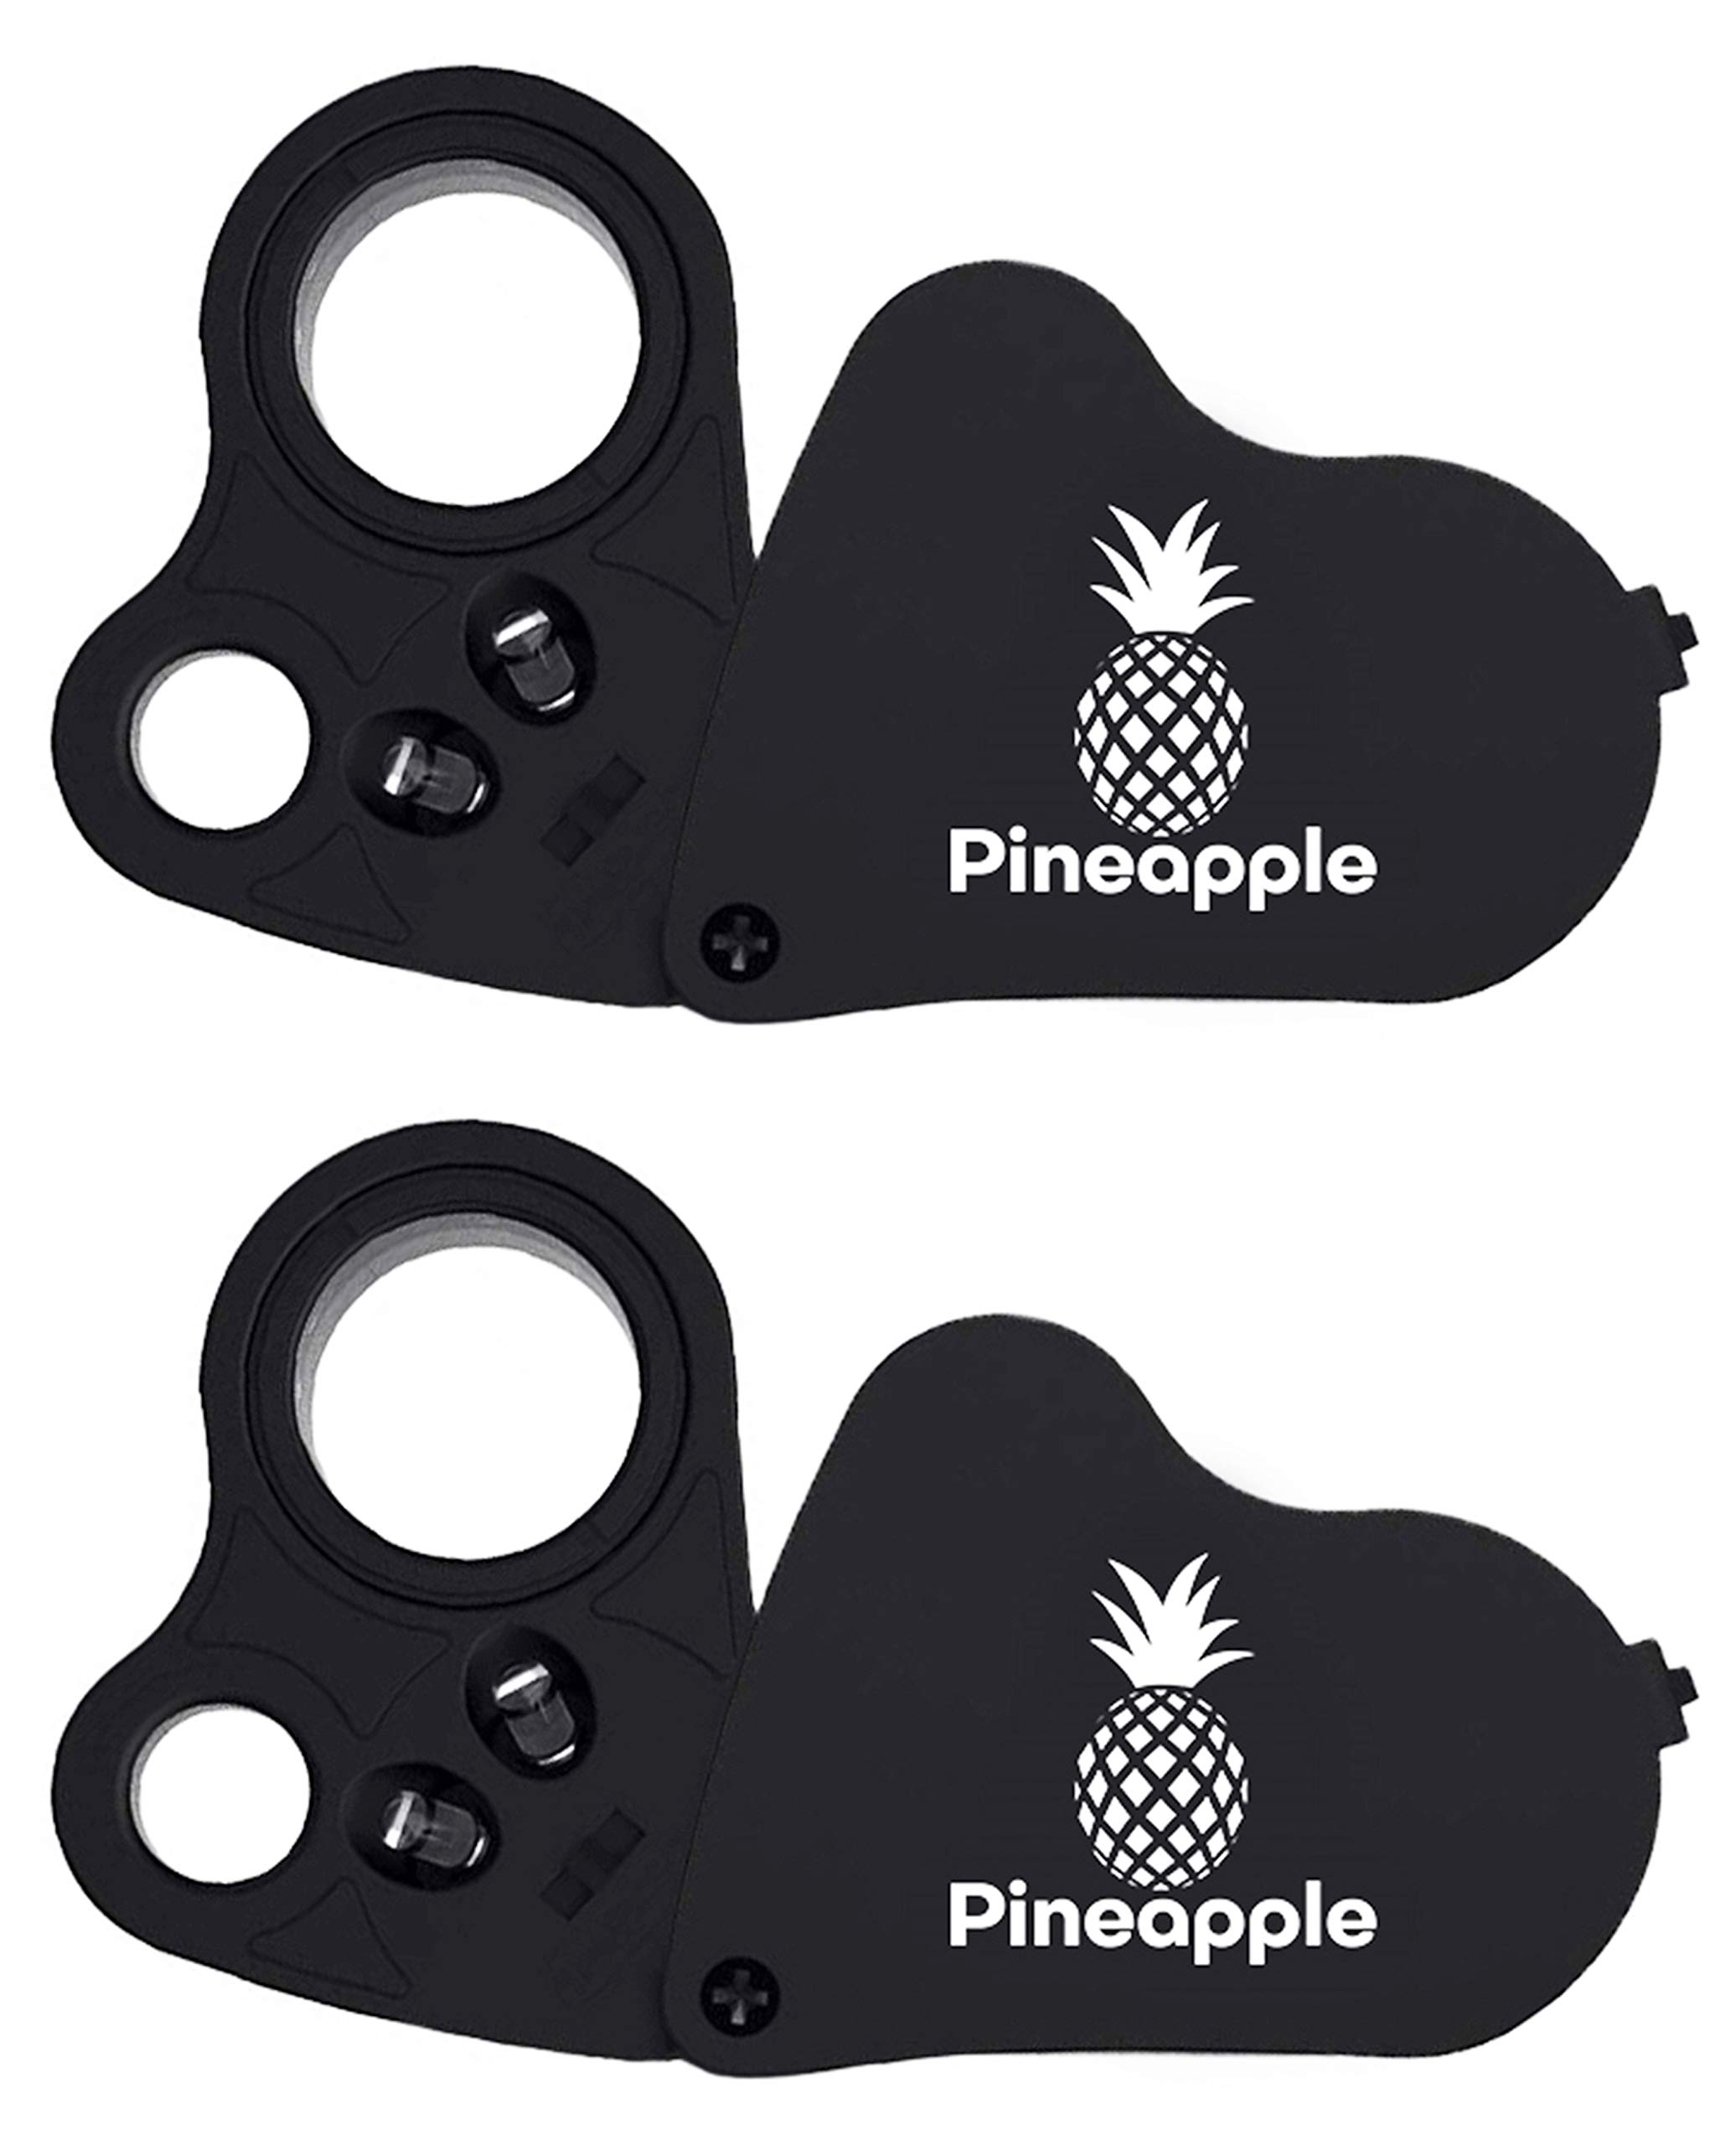 Pineapple 30X Jewelers Loupe Magnifier with Light Foldable Pocket  Magnifying Glass Jewelry Eye Loop for Jewelers